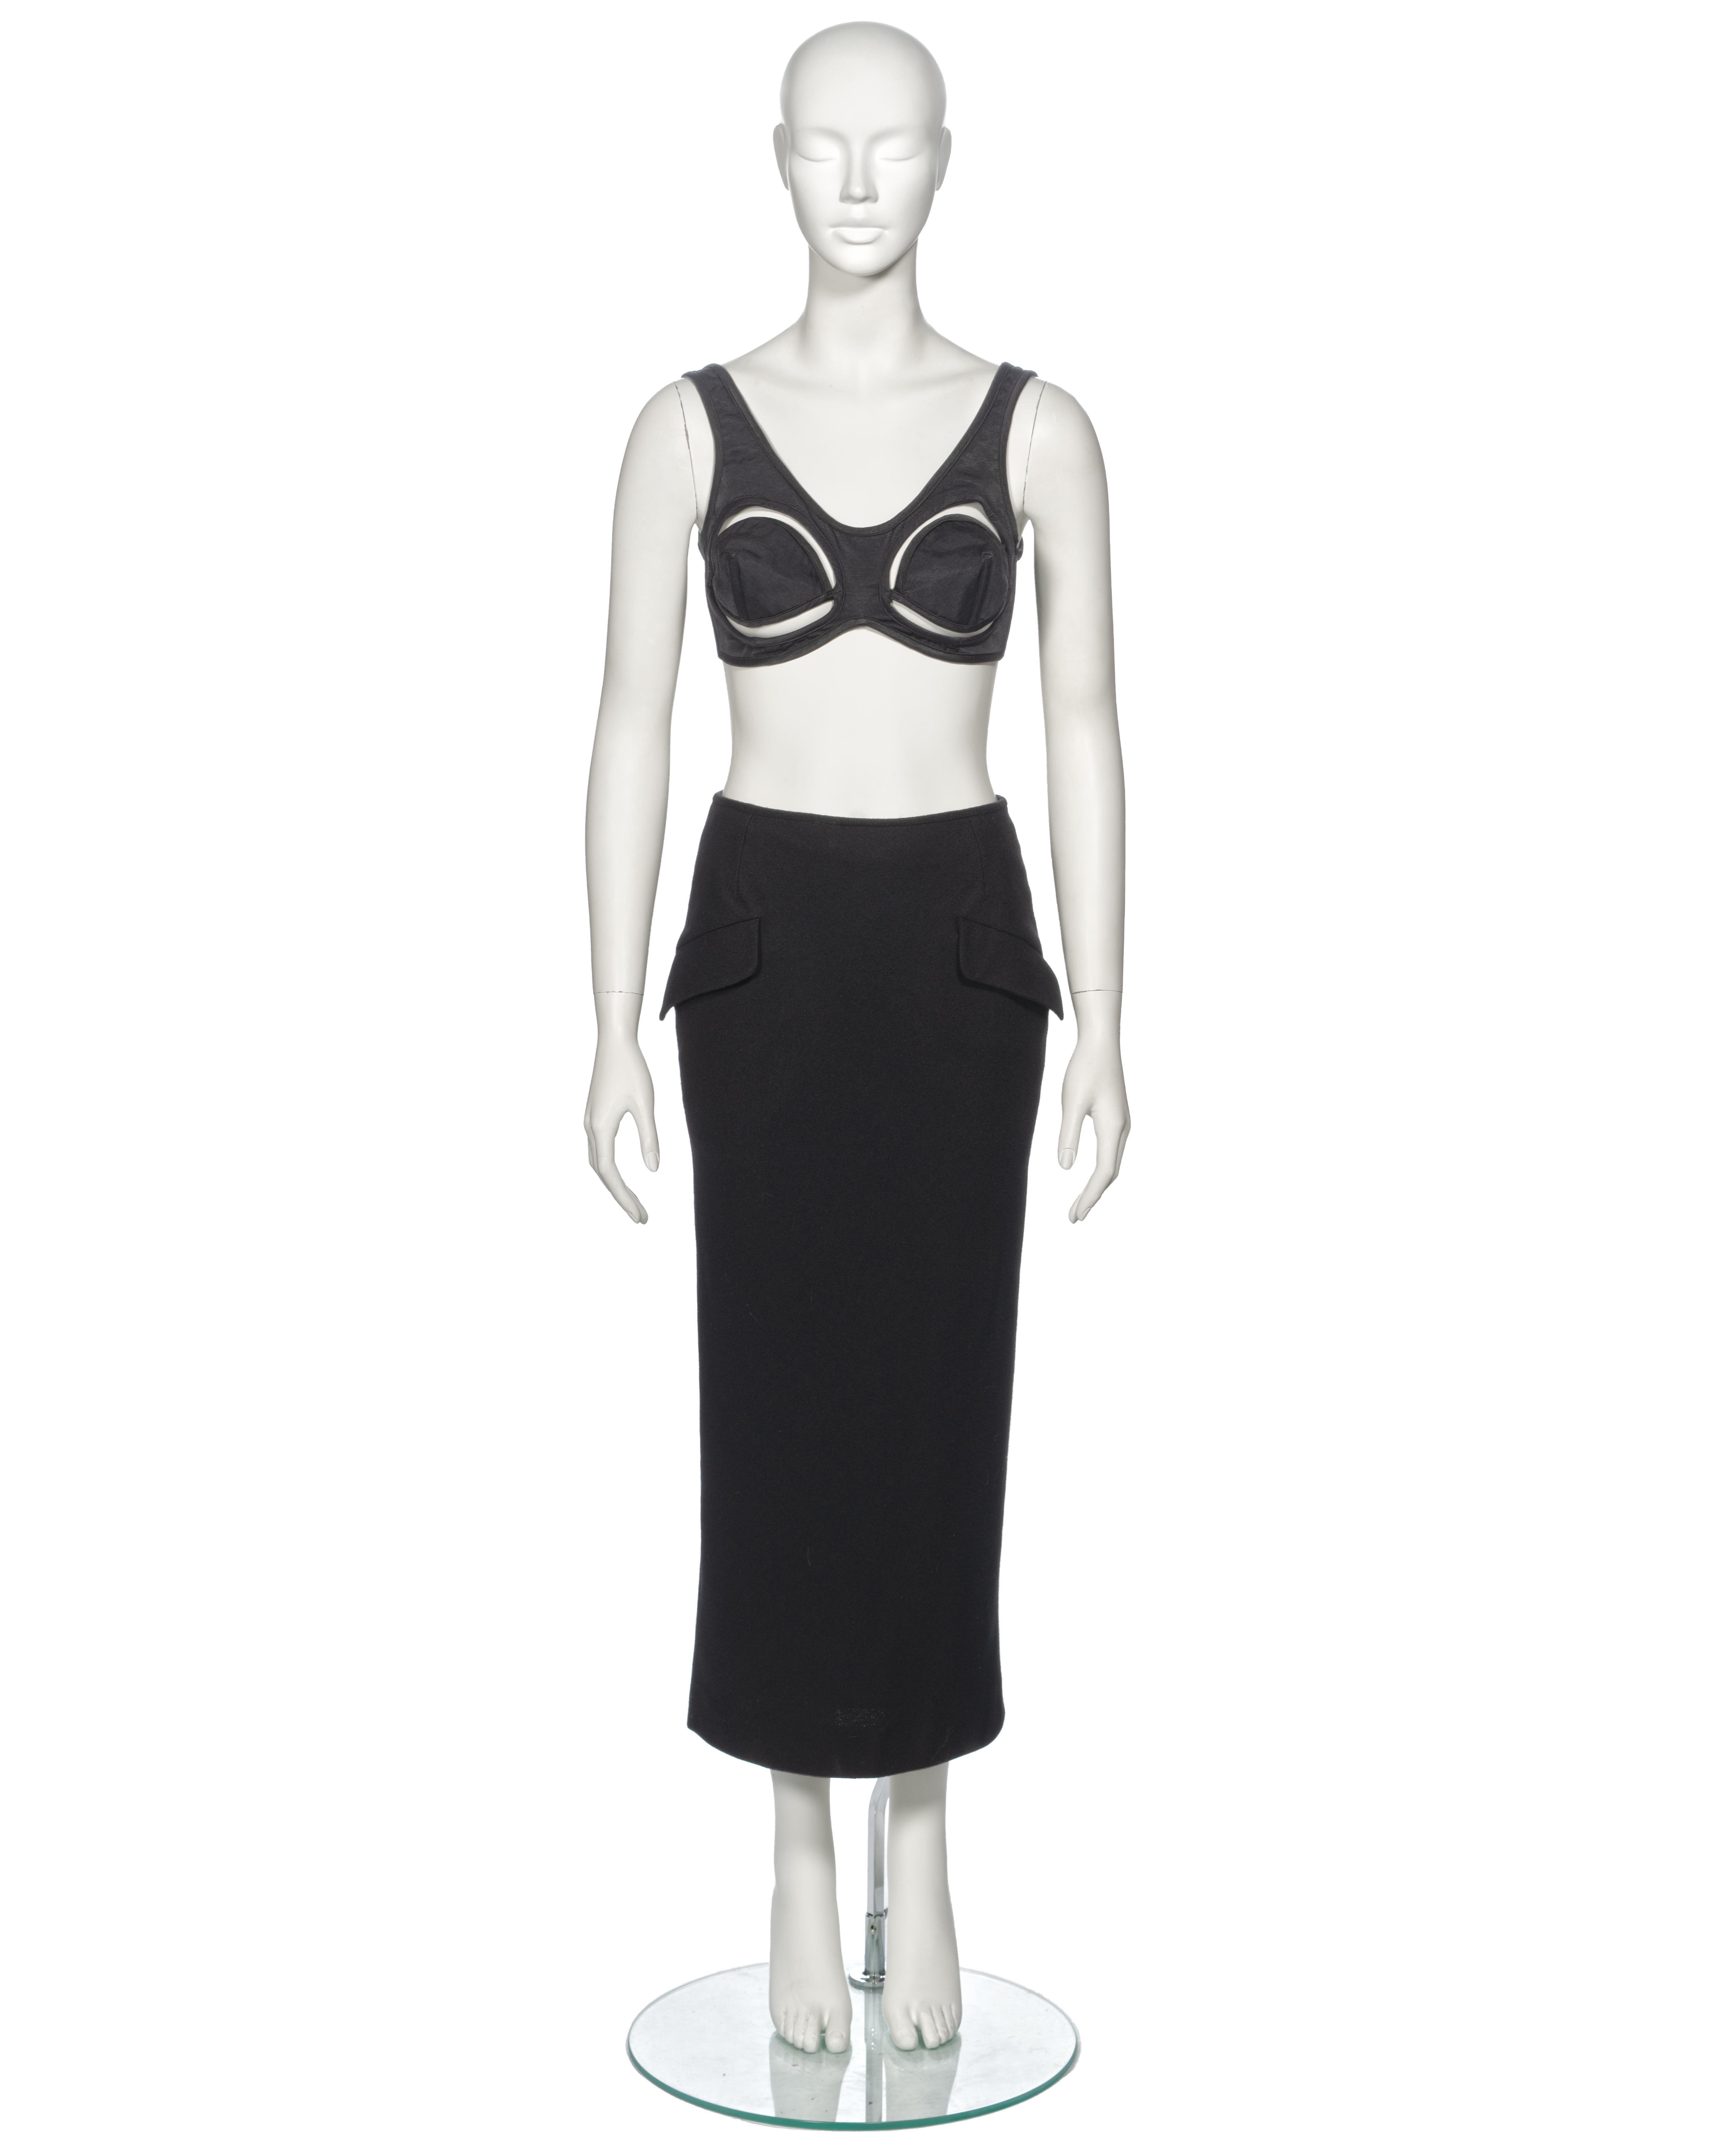 ▪ Archival Jean Paul Gaultier Evening Ensemble
▪ Spring-Summer 1993
▪ Sold by One of a Kind Archive
▪ Satin twill cone bra with cut outs and lace-up fastening 
▪ Wool crepe midi pencil skirt with two front flap pockets 
▪ Lined with turquoise satin